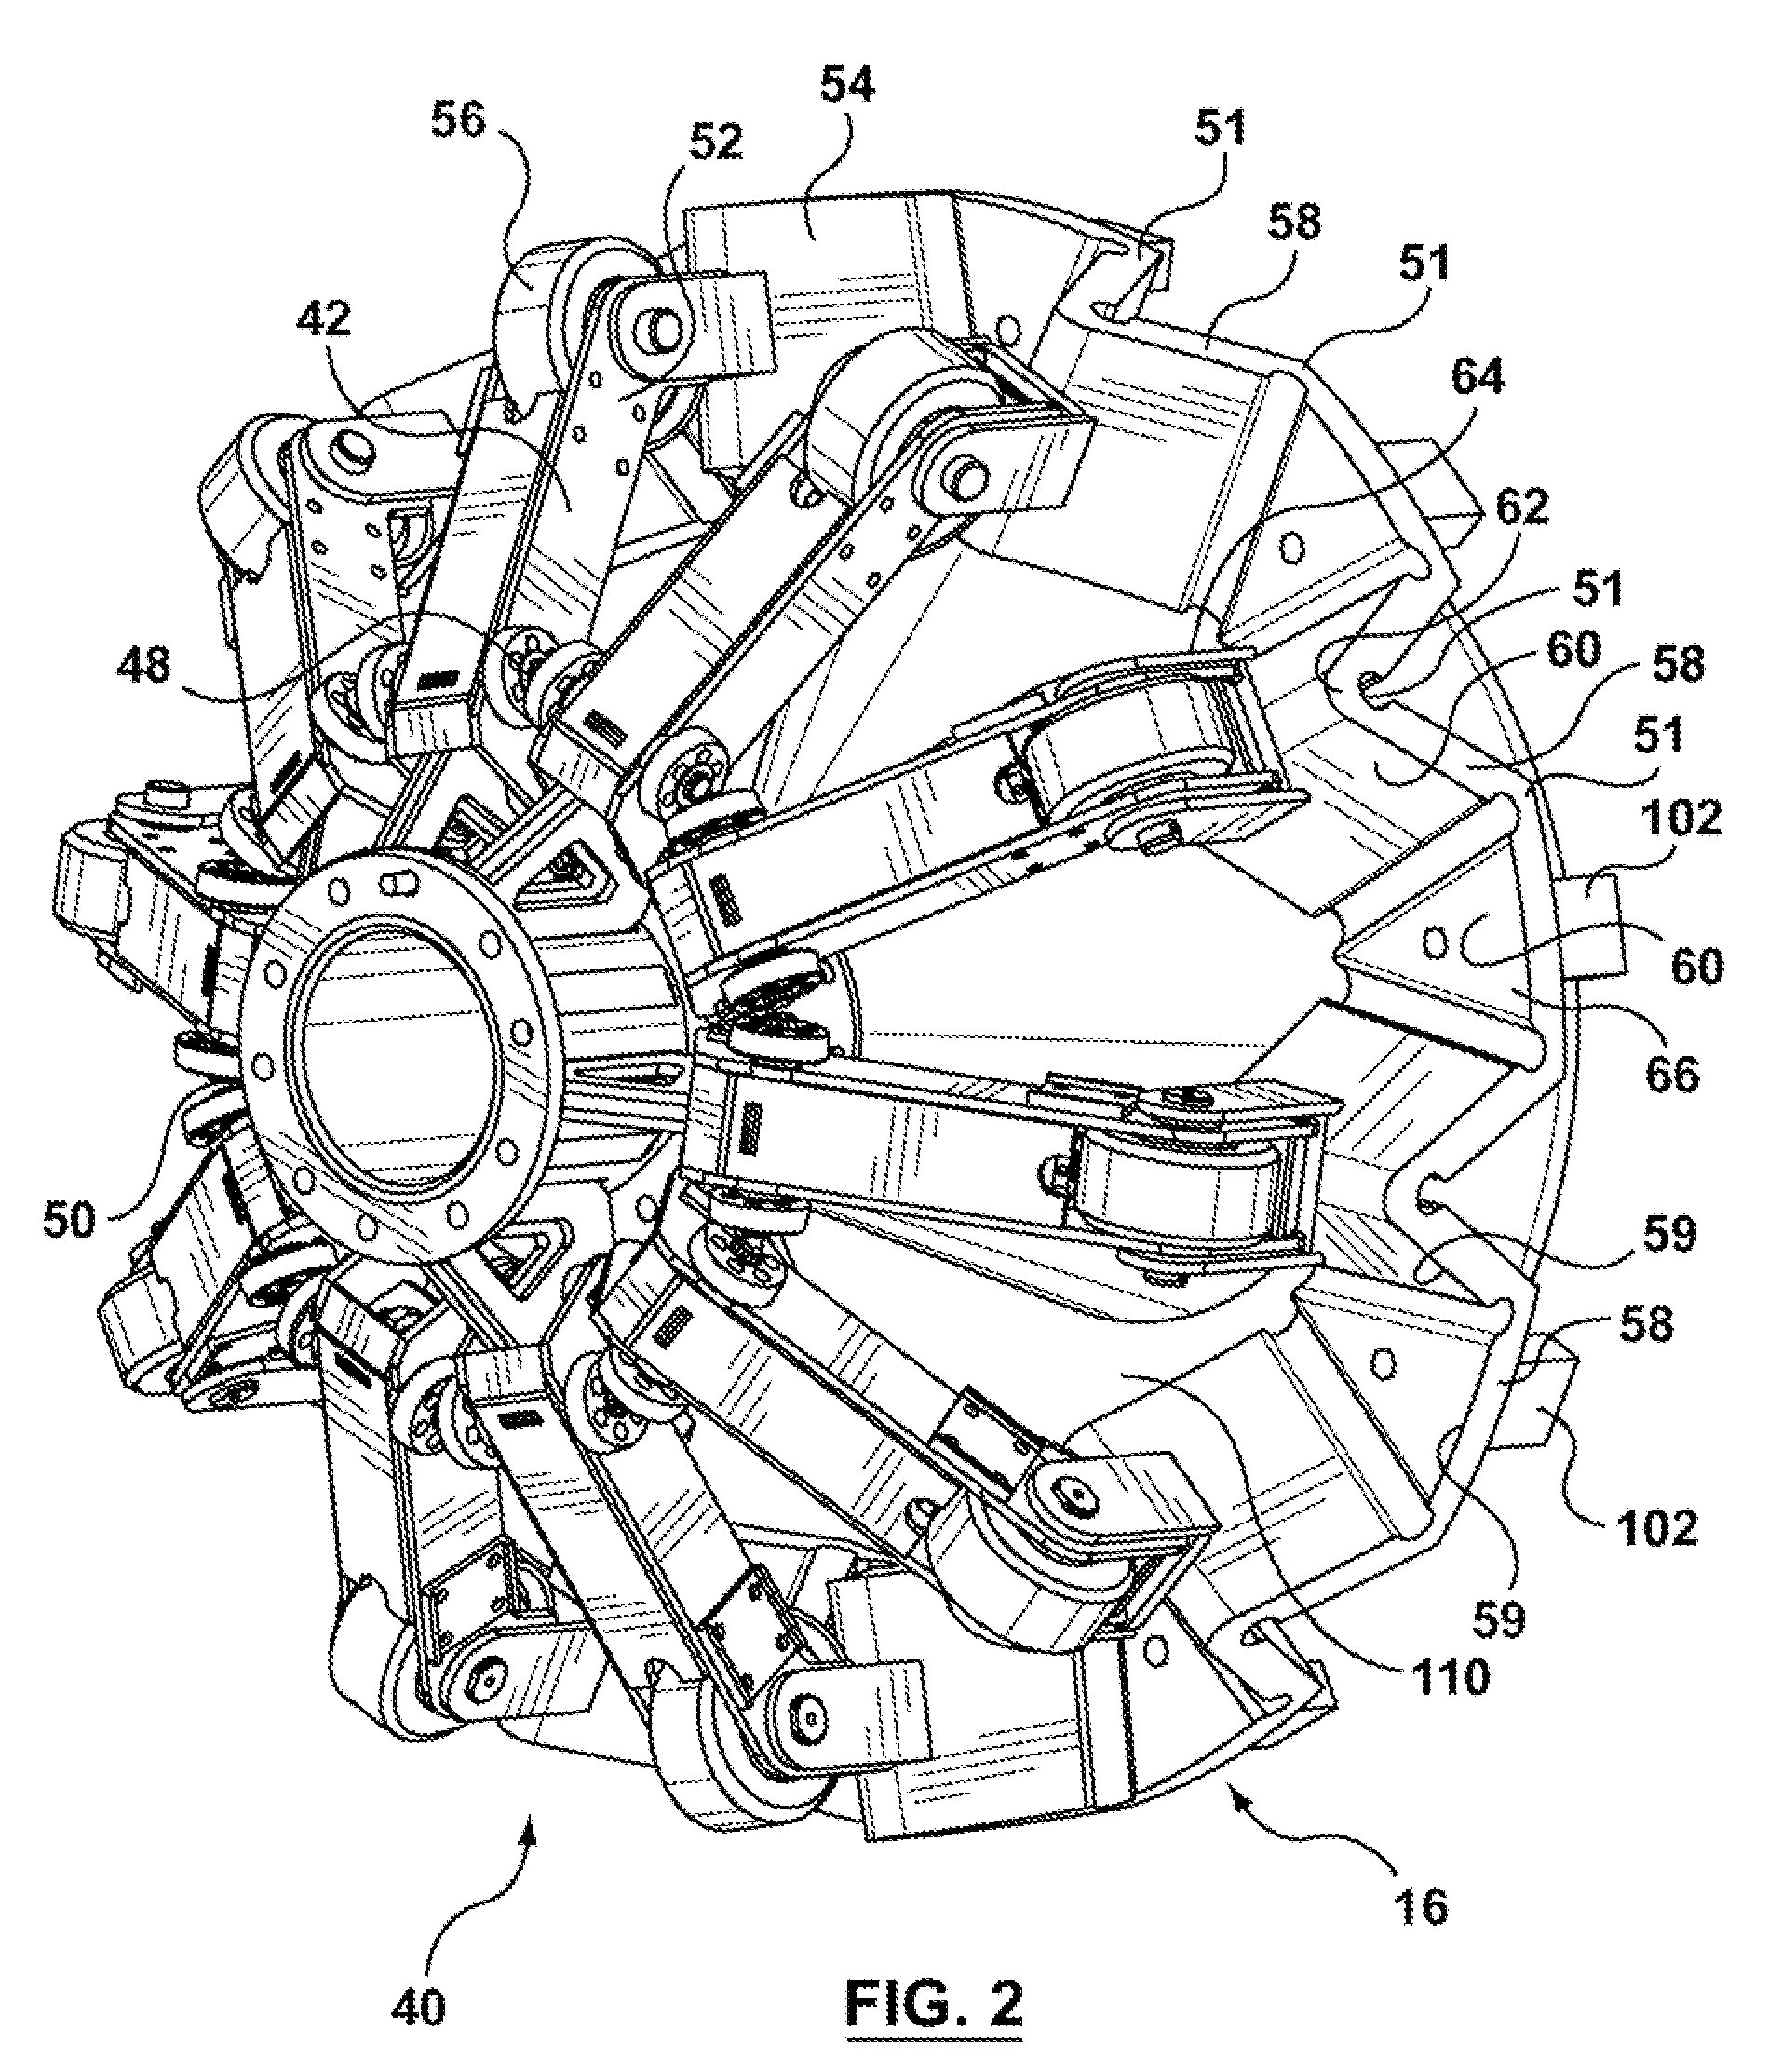 Device for cleaning multidiameter pipelines